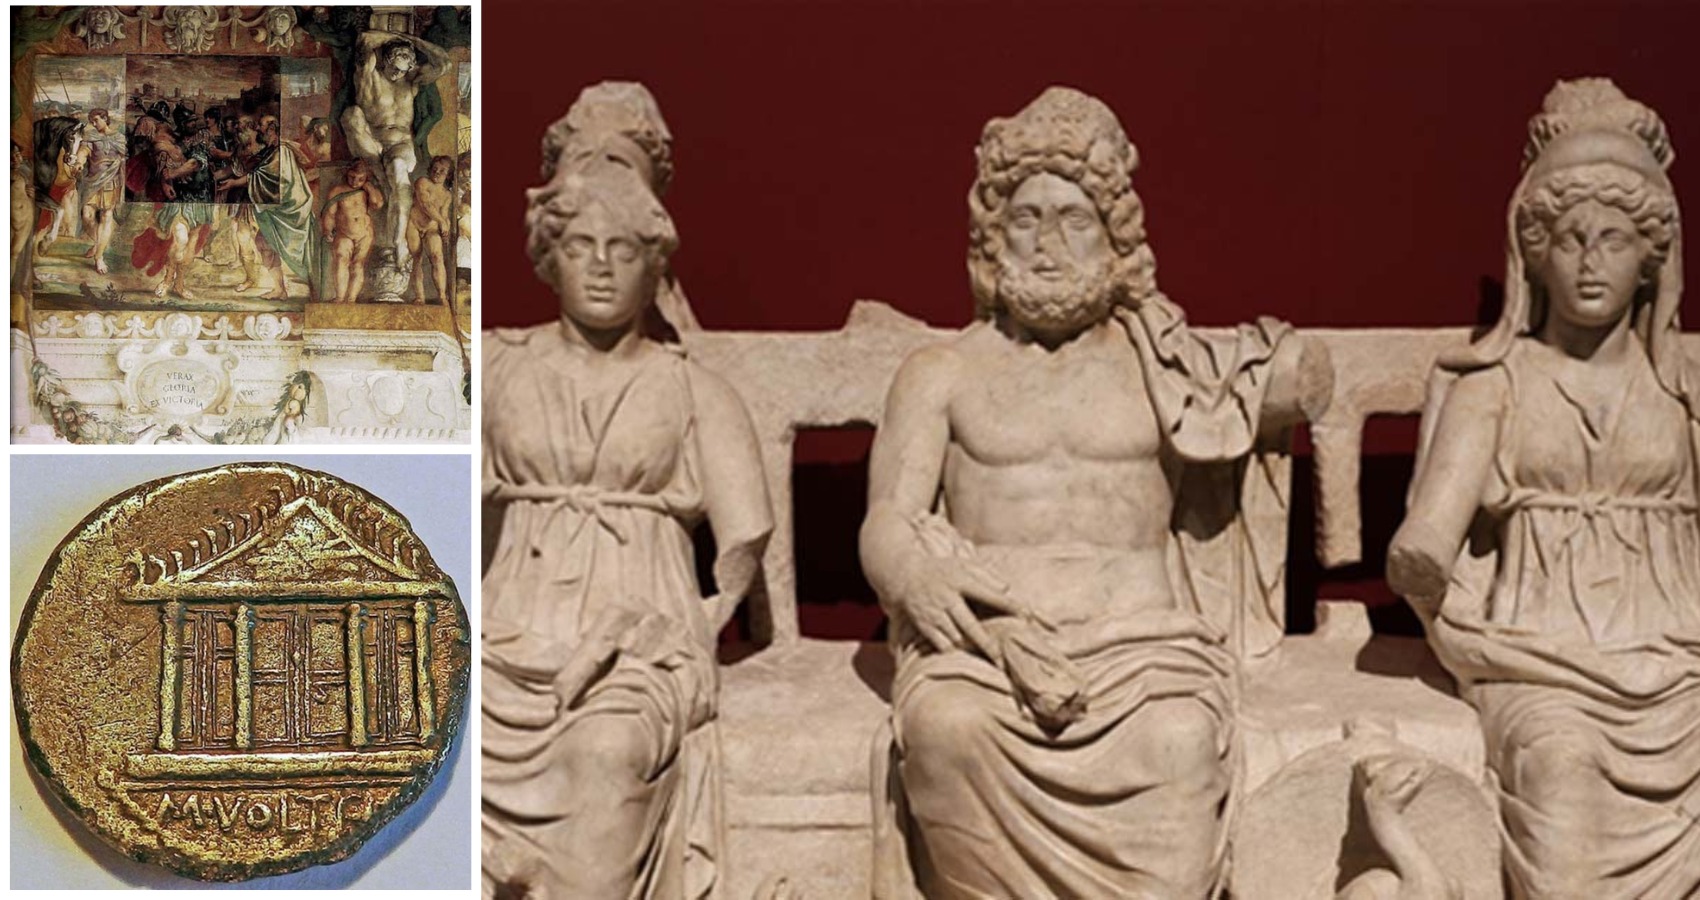 What Was the Significance of The Capitoline Triad to the Roman Pantheon?